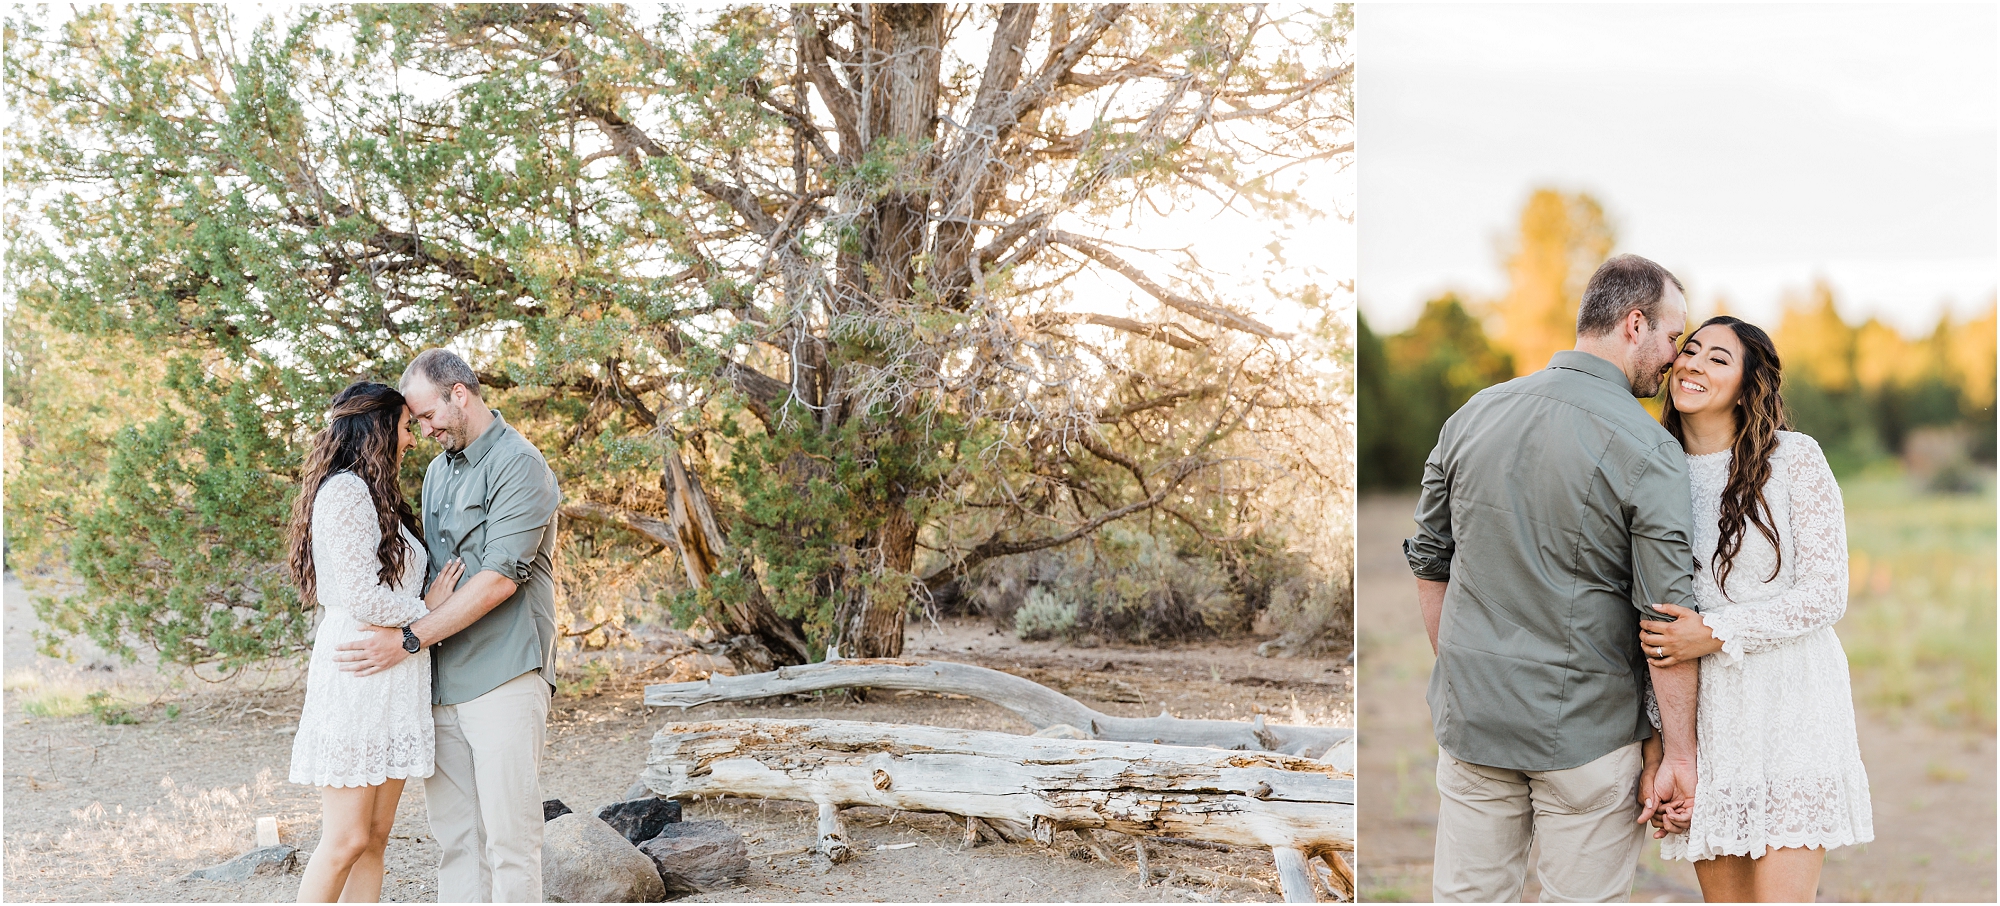 Elope in Bend Oregon and the magical sunsets that filter through the juniper trees. | Erica Swantek Photography